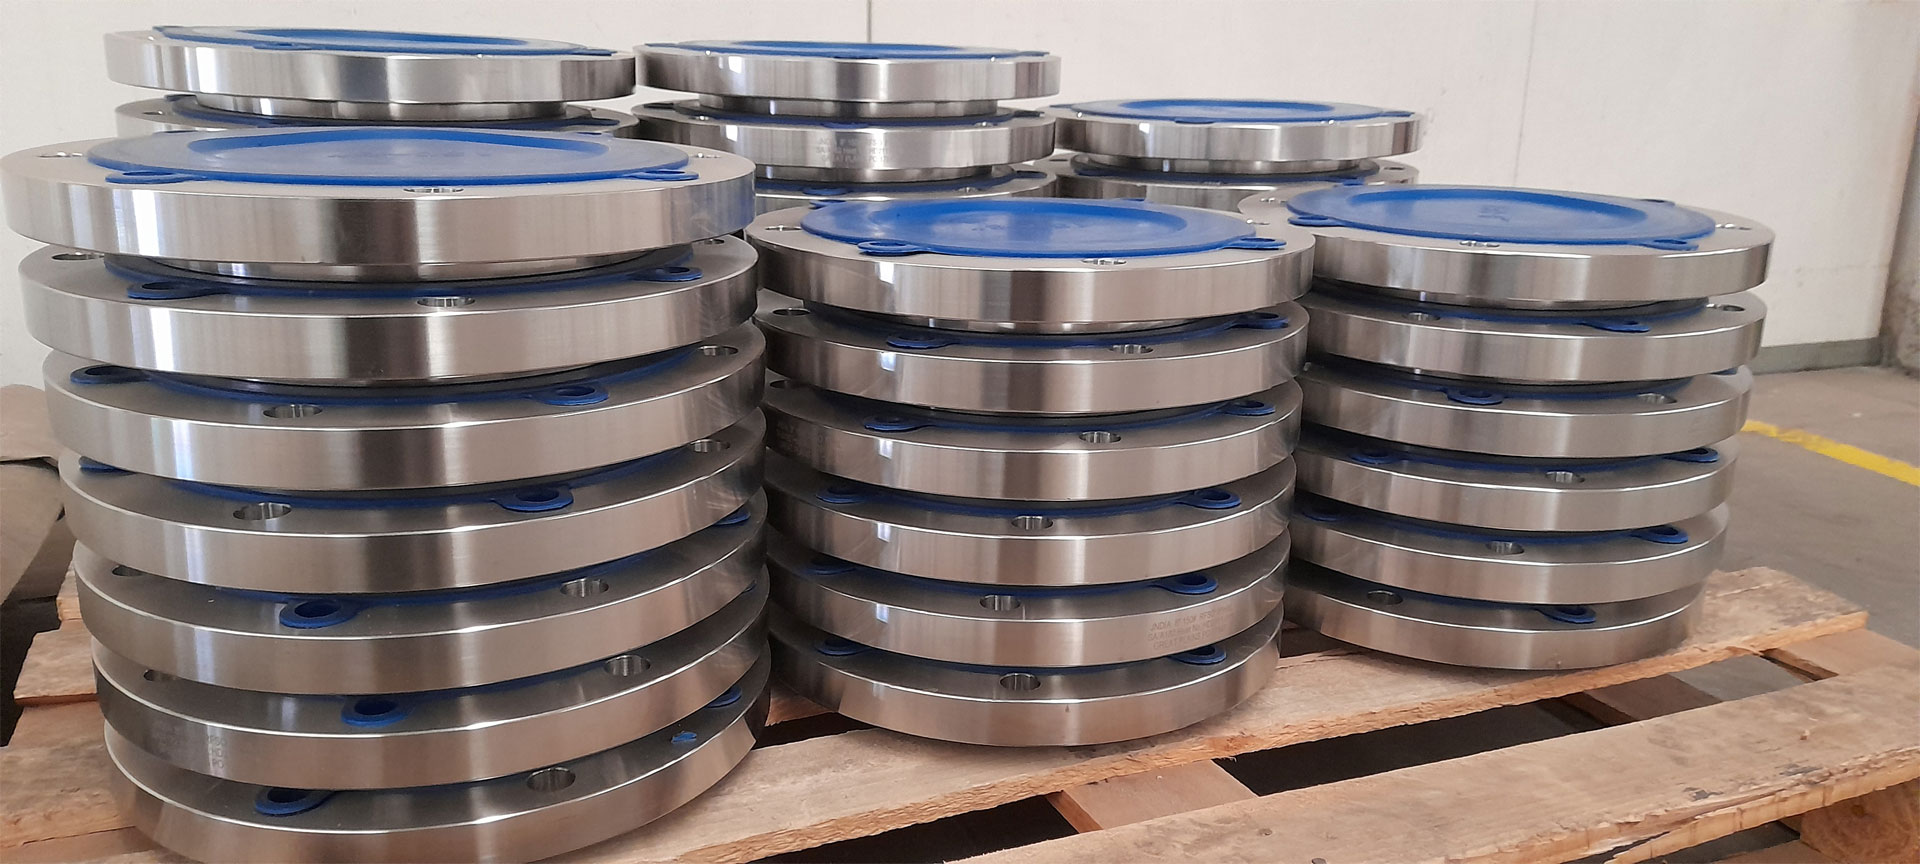 Gpss stainless steel flanges in the Santiago warehouse